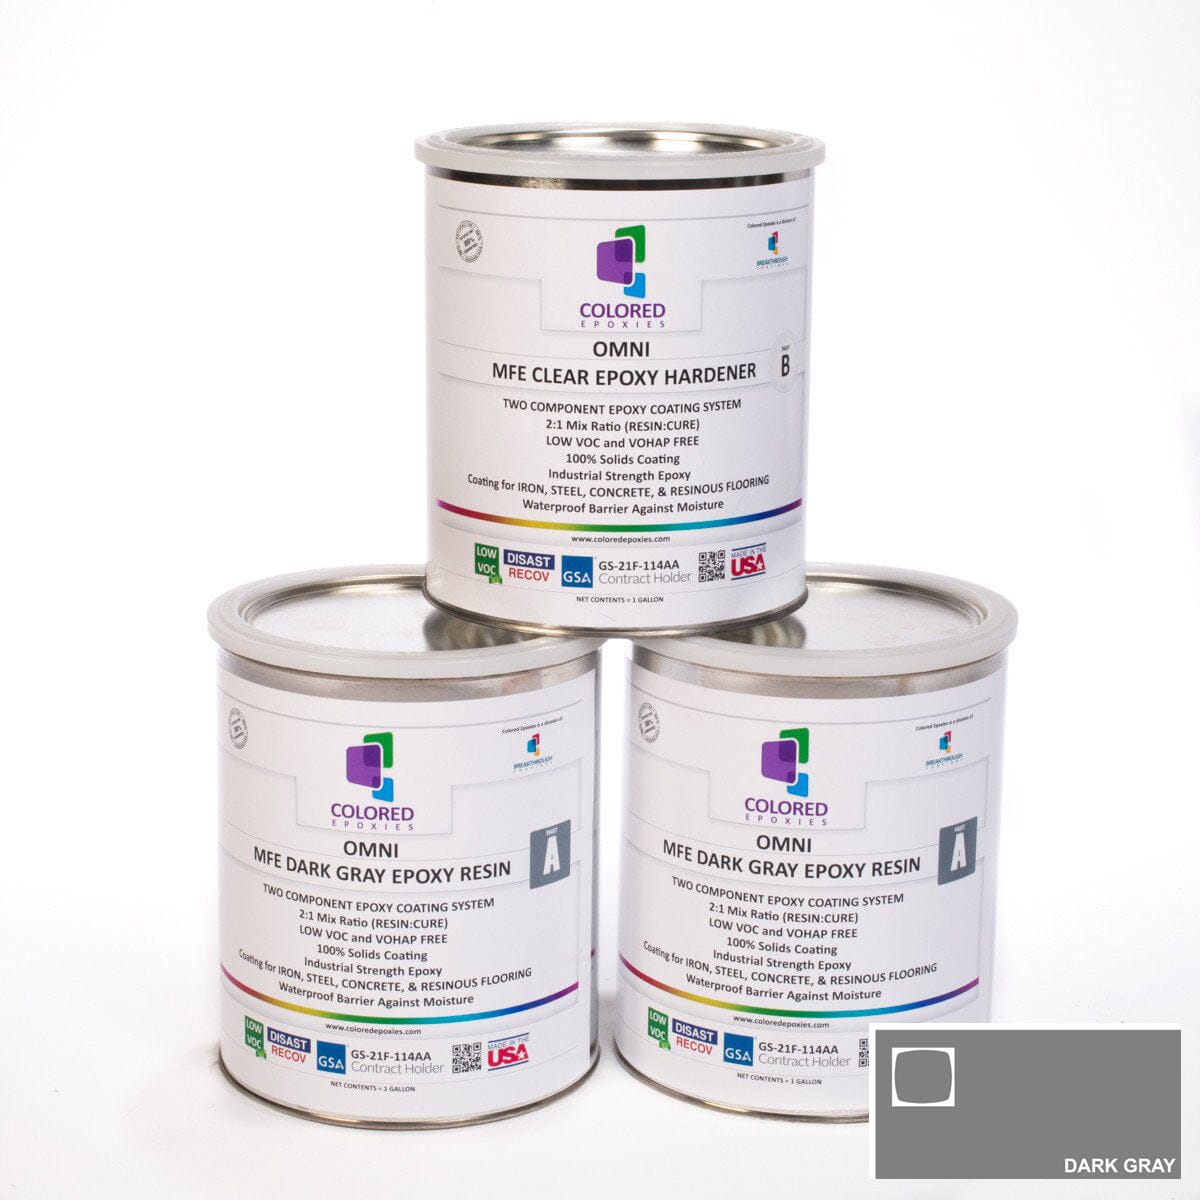 Coloredepoxies 10005 Black Epoxy Resin Coating Made with Beautiful and  Vibrant Pigments, 100% Solids, for Garage Floors, Basements, Concrete and